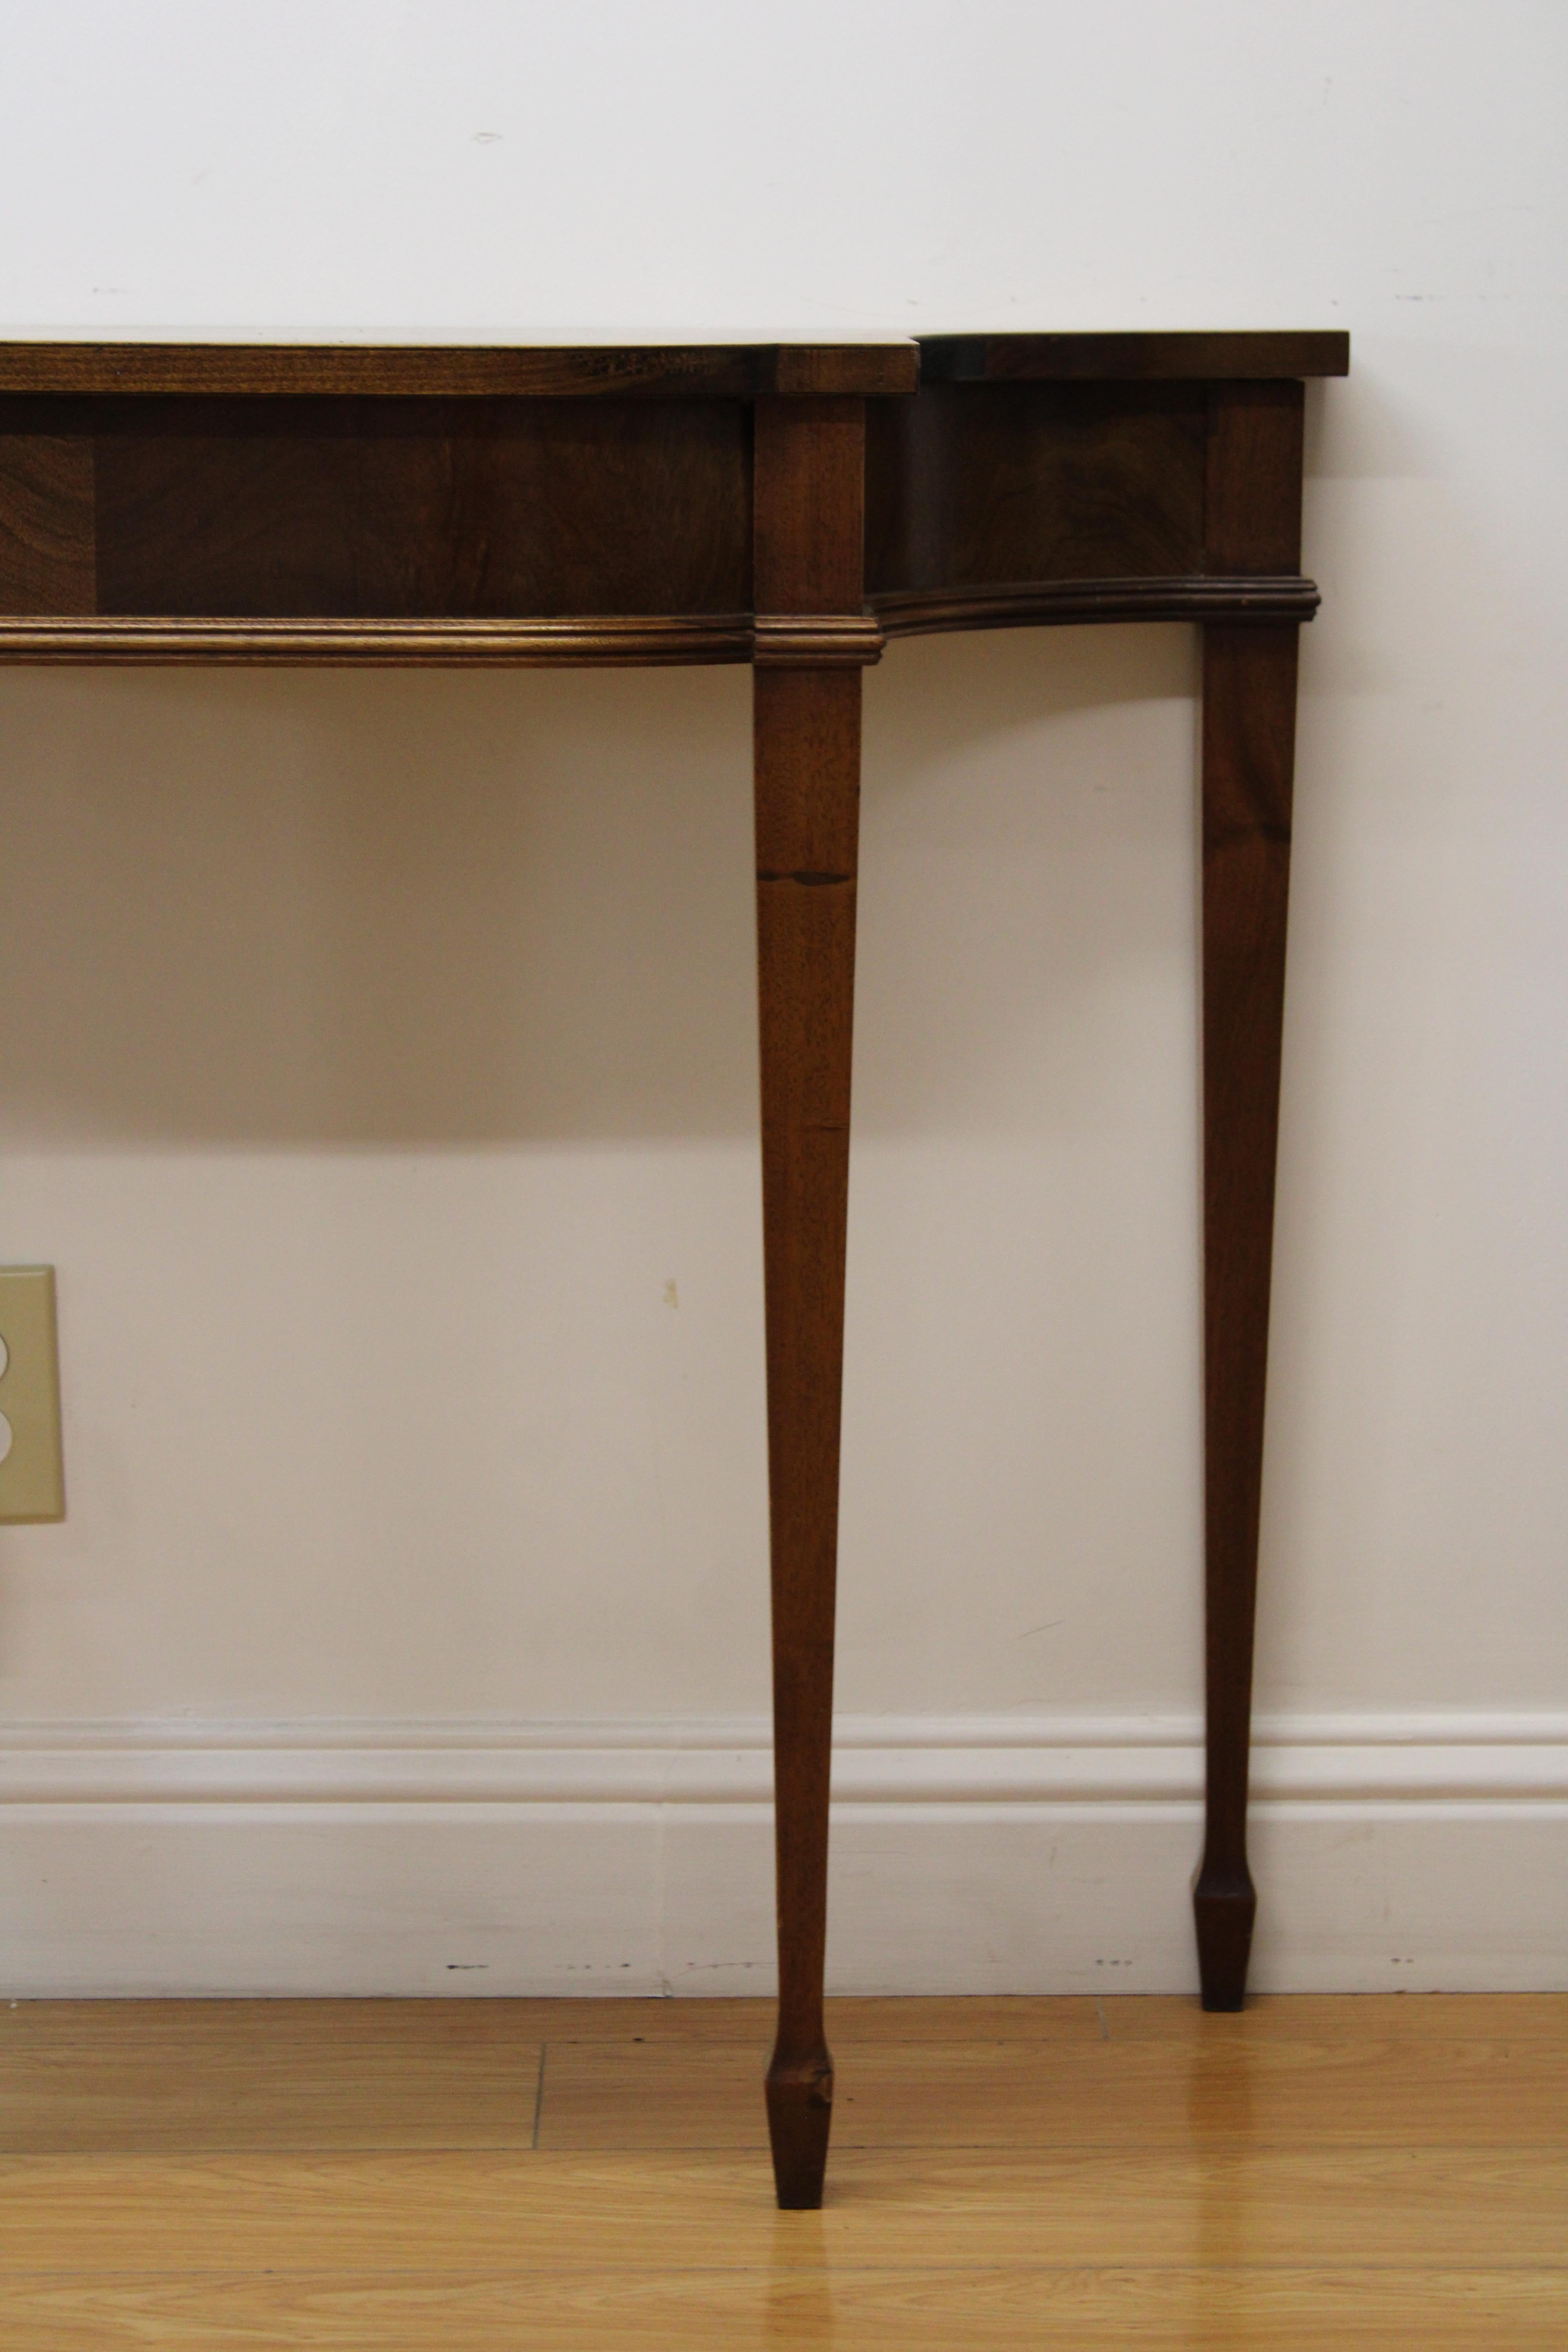 C. Early 20th Century

English Style Entry Hallway Table w/ Tapered Legs